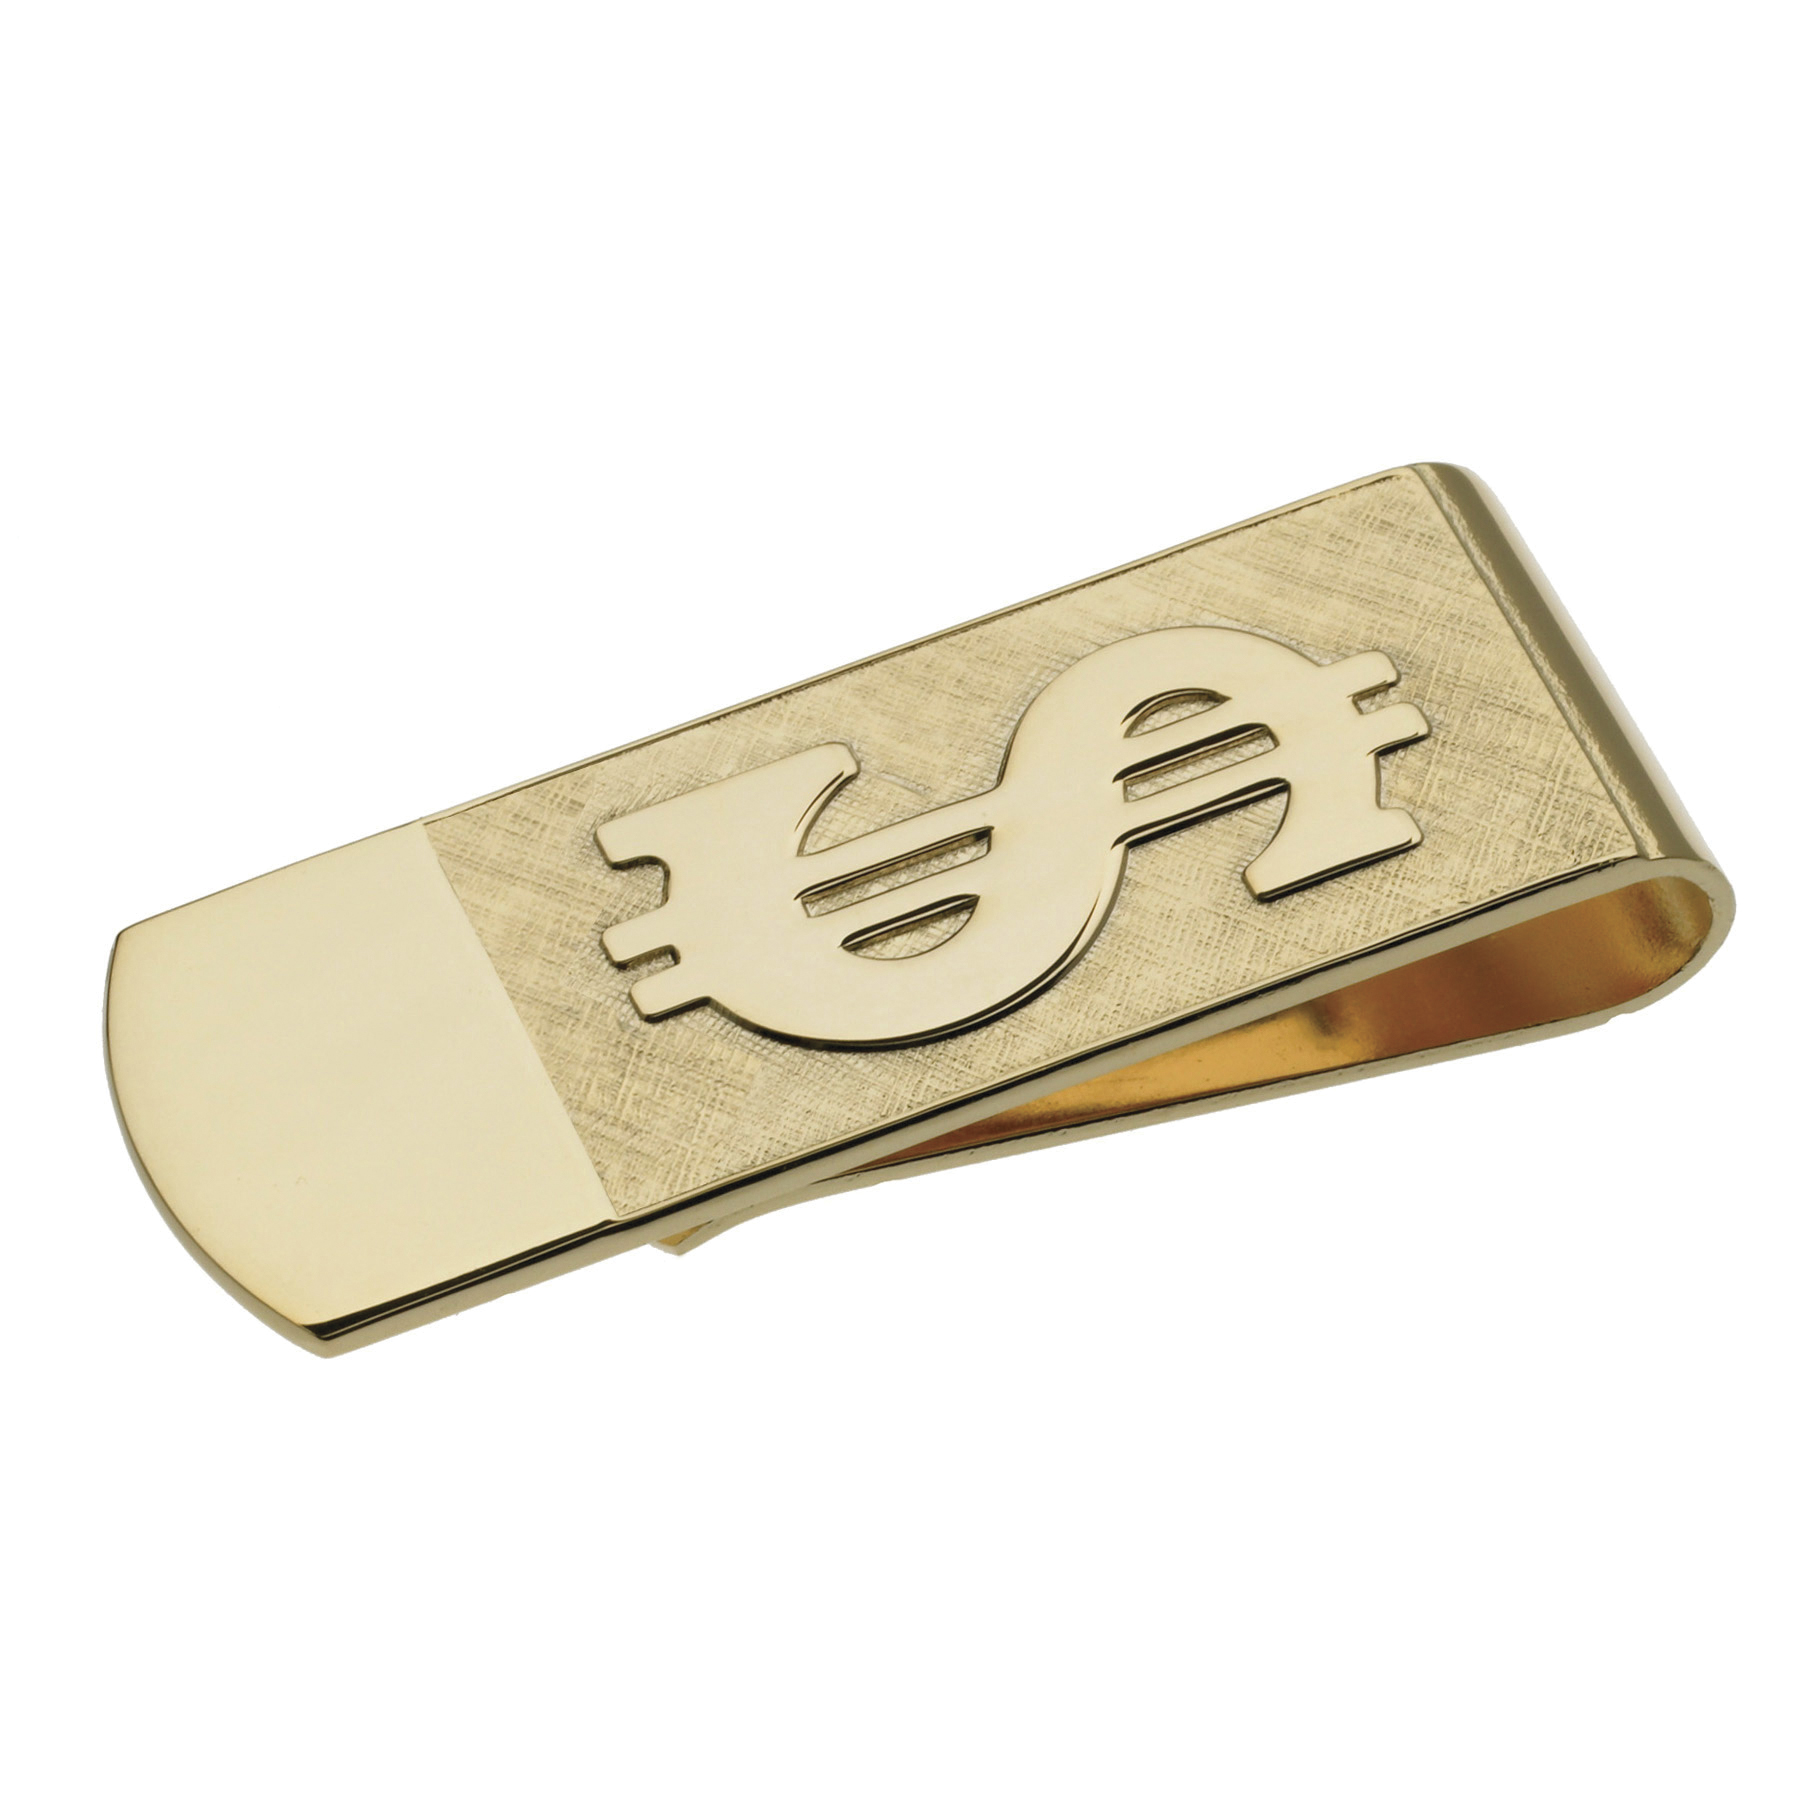 BMC-7012 Dollar Sign Money Clip in Gold Electroplated Finish